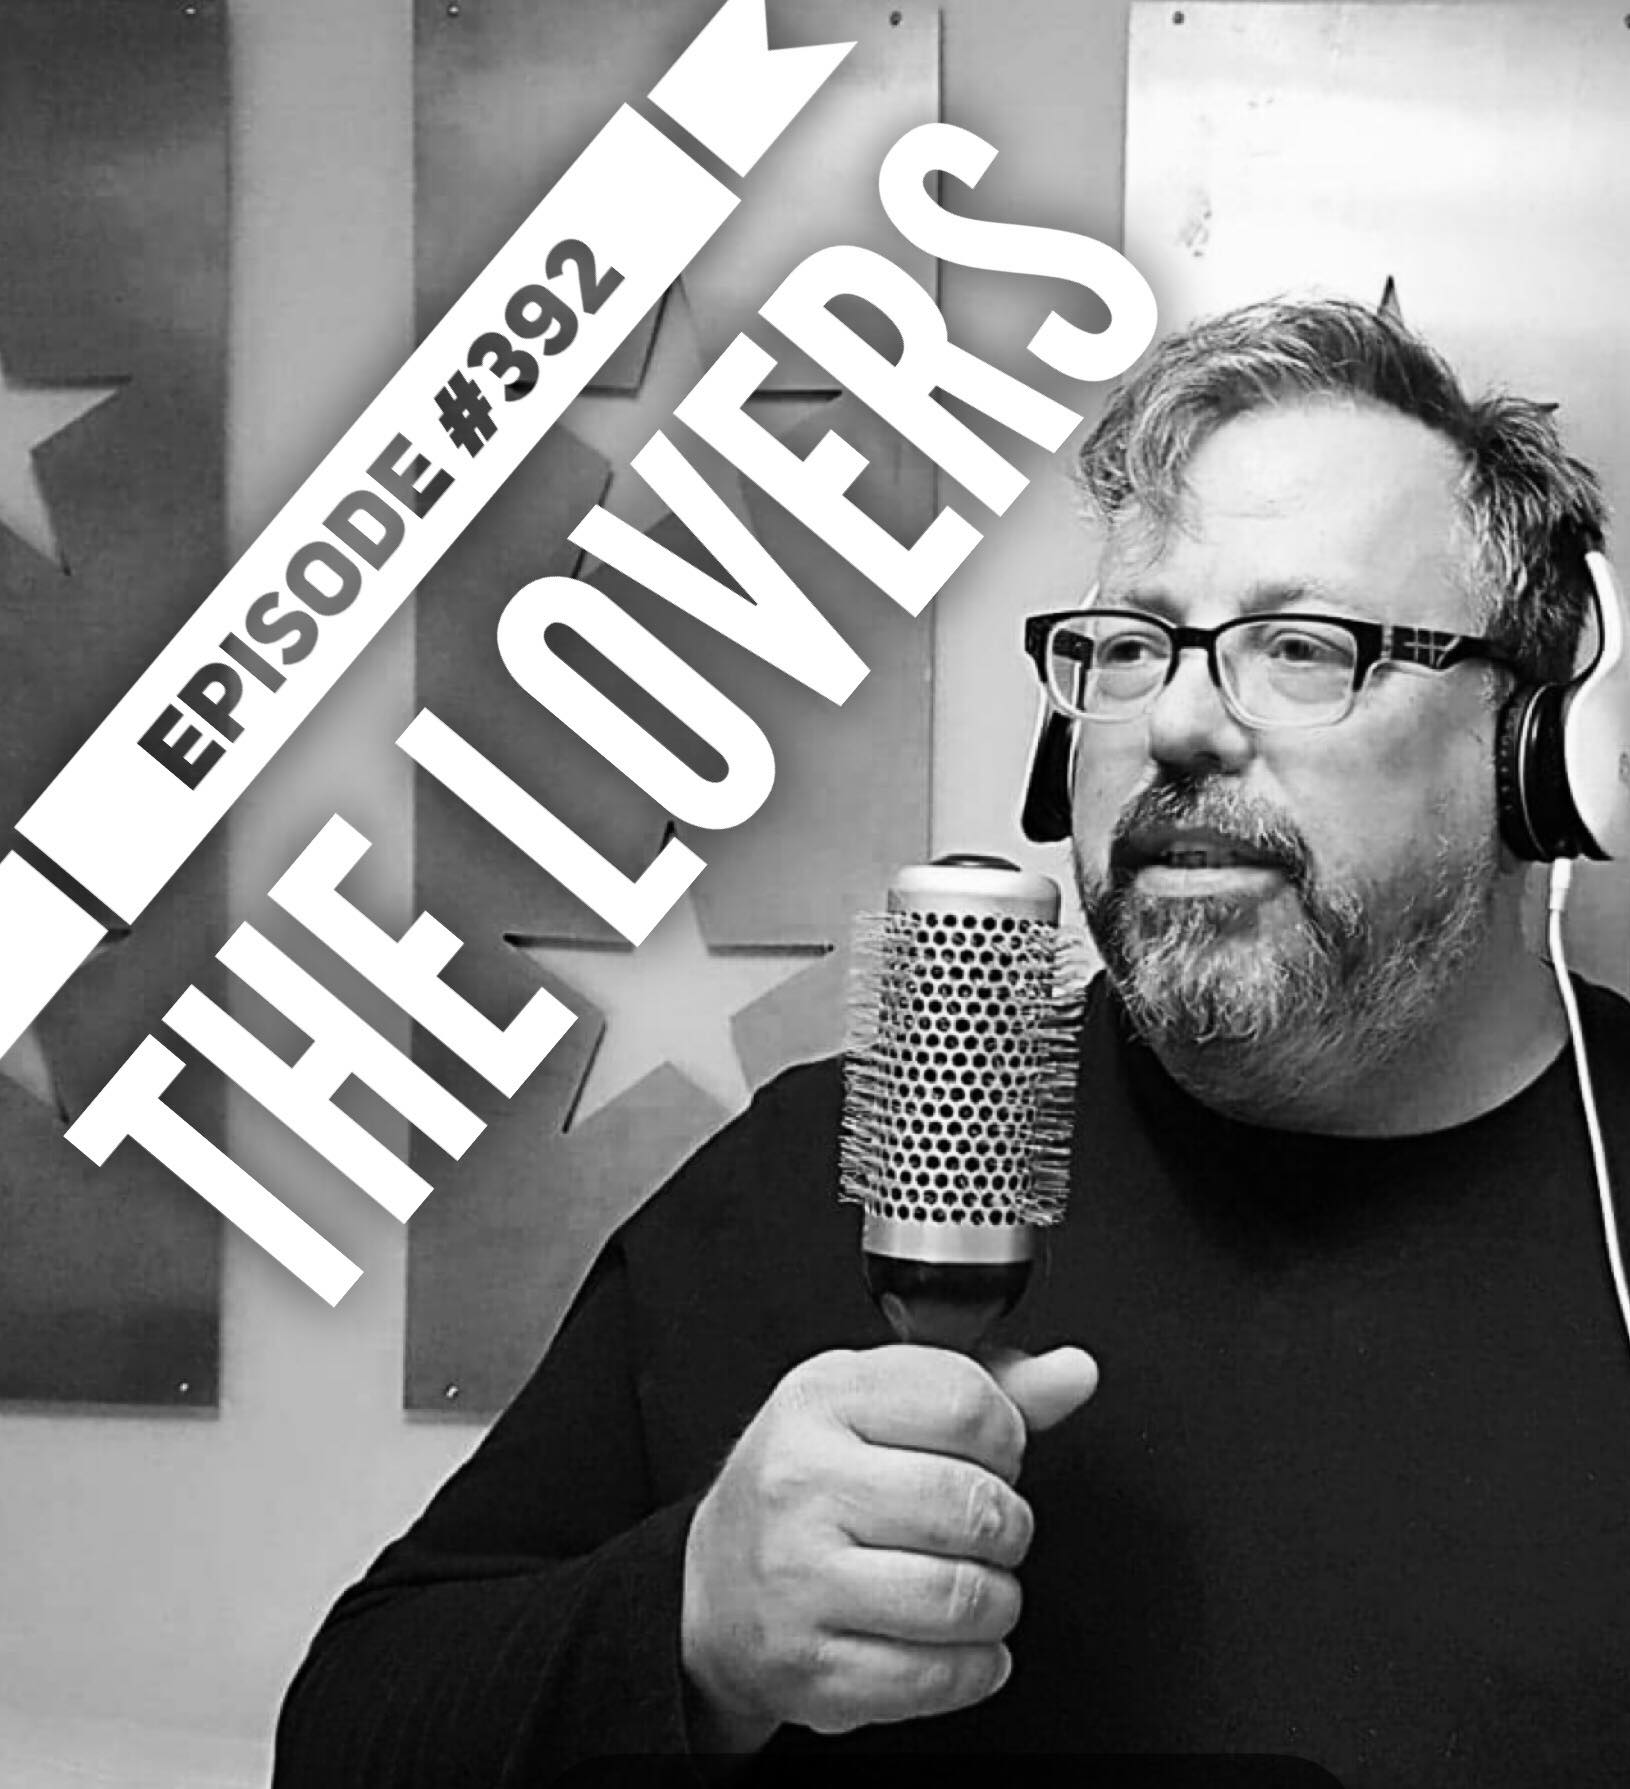 WR392: The Lovers